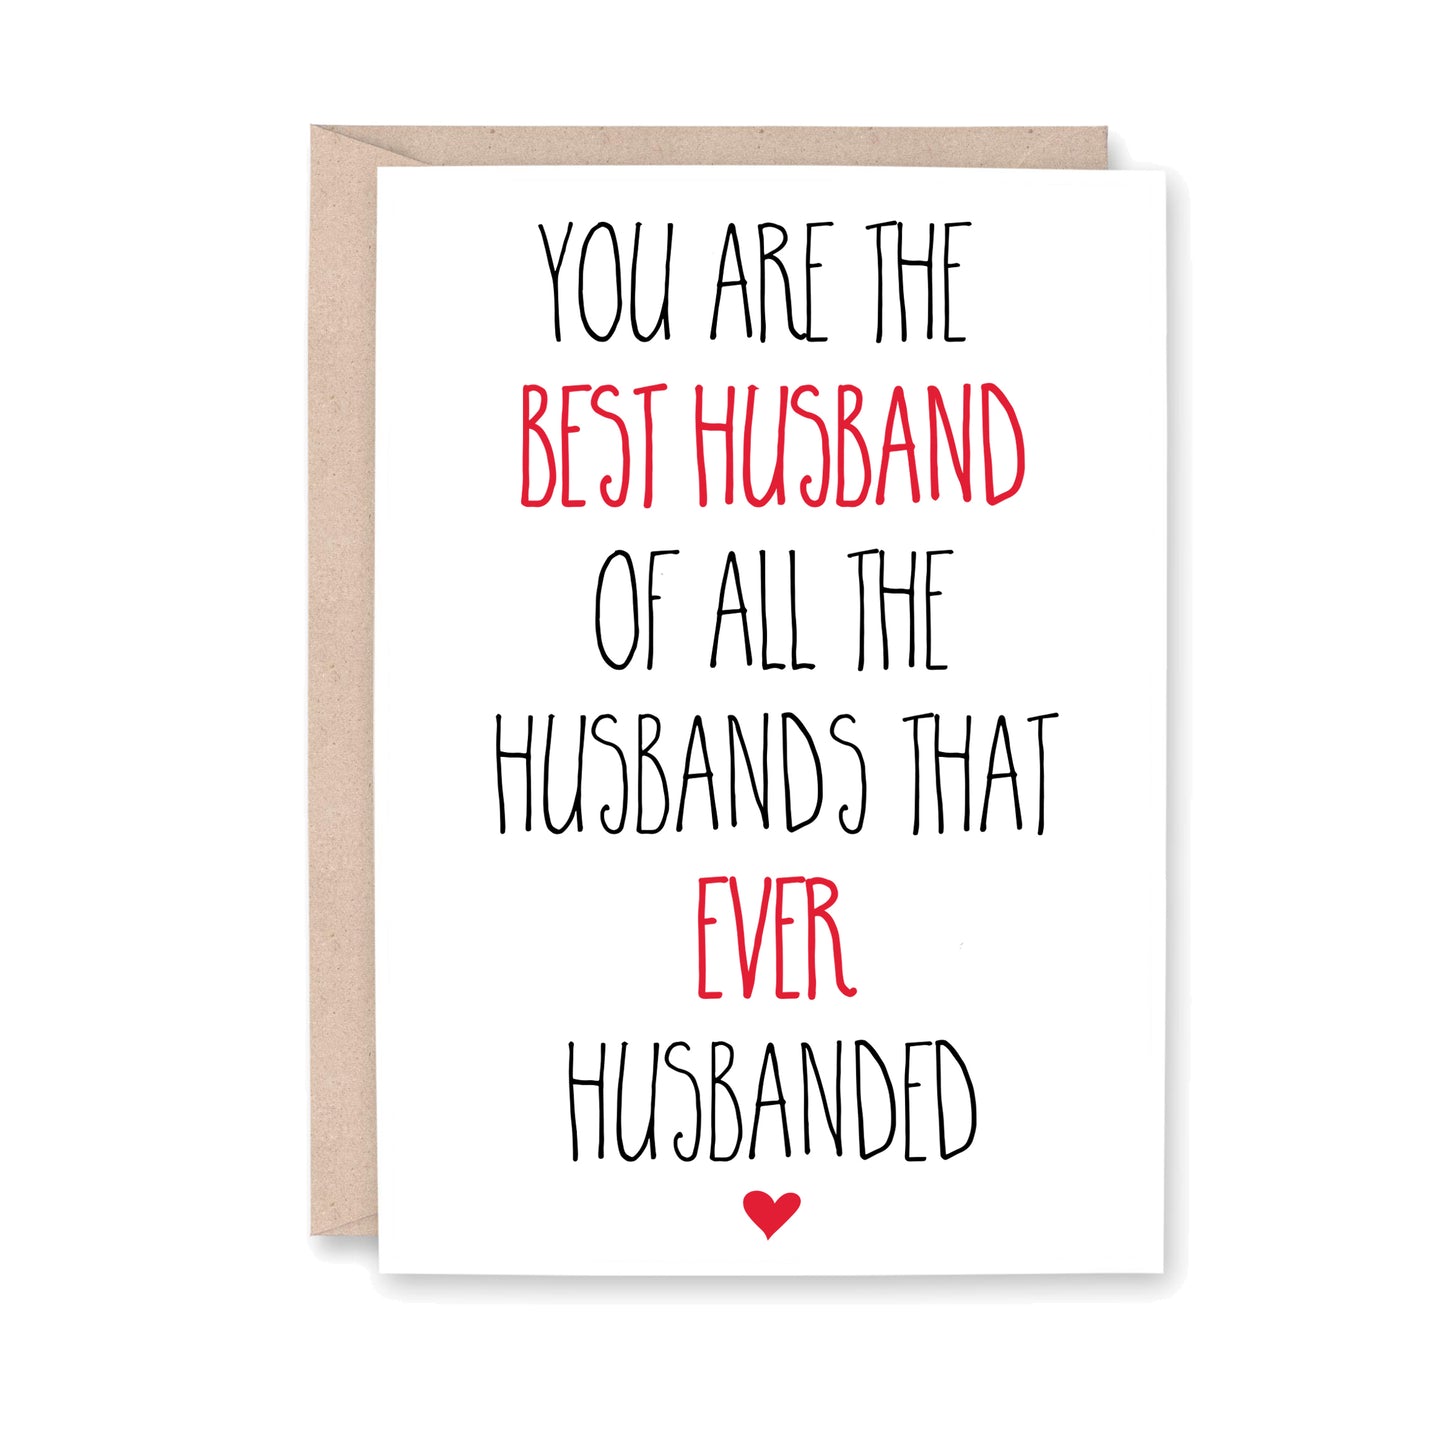 You are the BEST HUSBAND of all the Husband's that EVER Husbanded